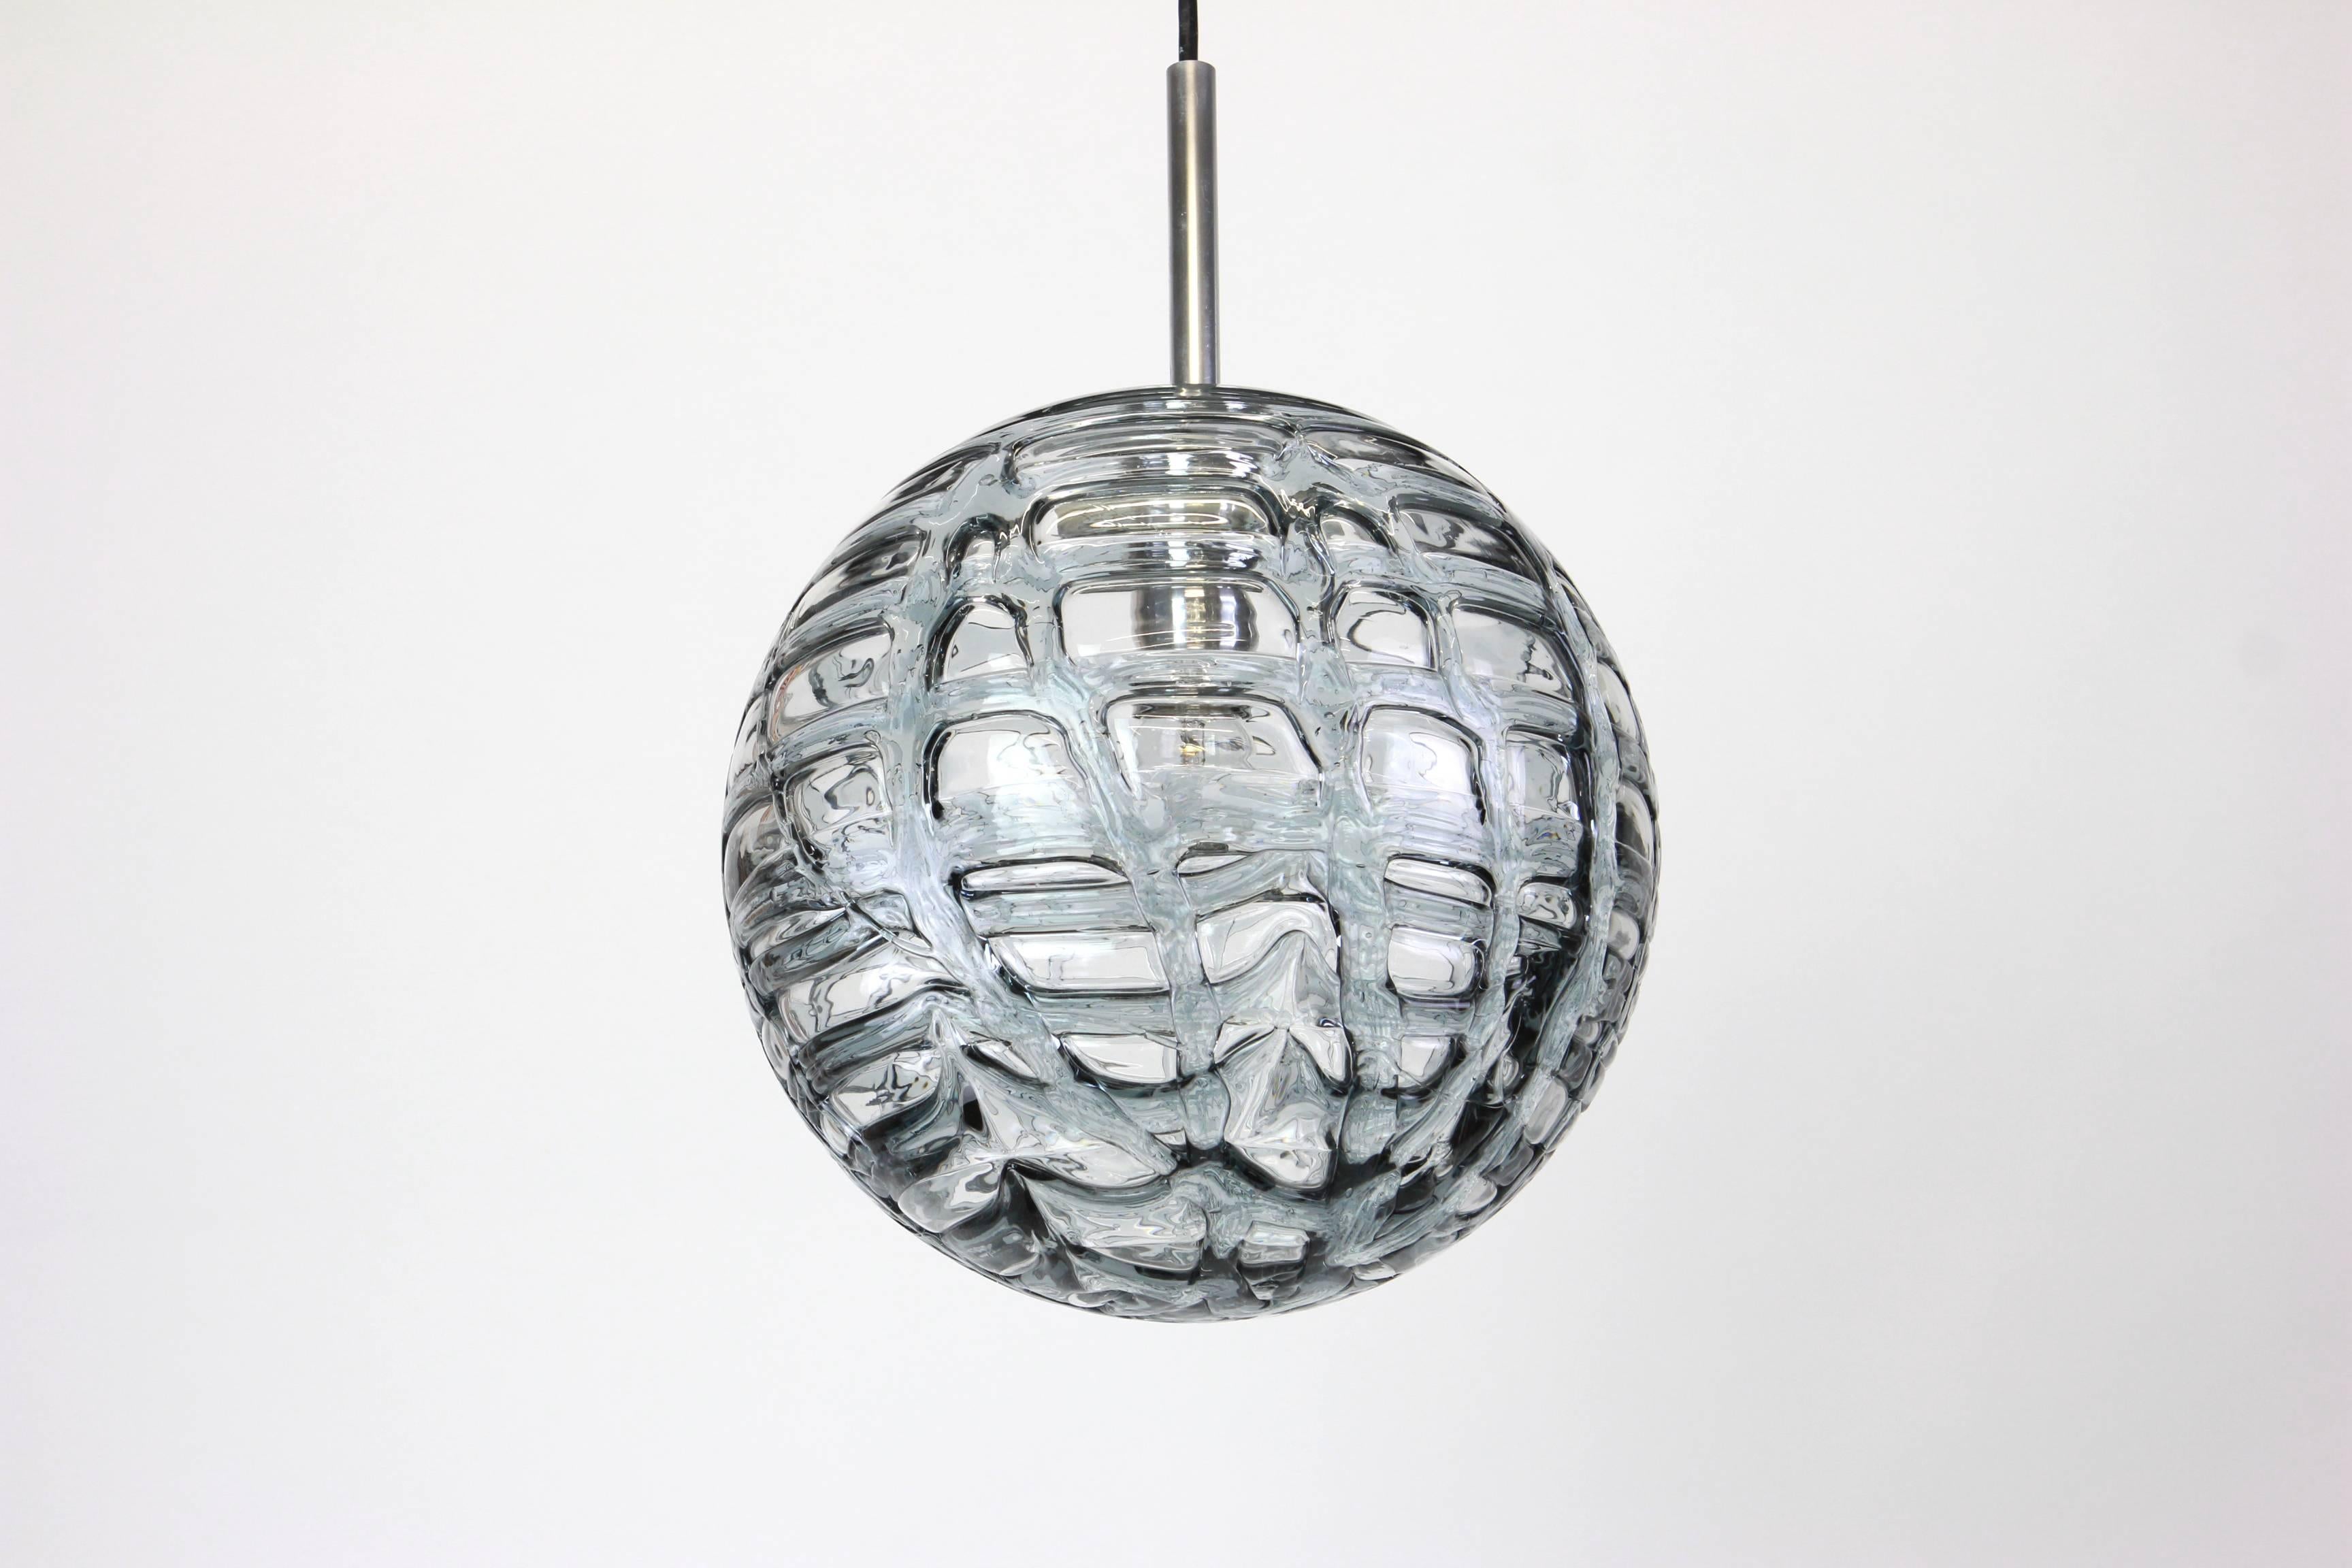 Doria ceiling light with large volcanic Murano glass ball.
High quality of materials - gives a wonderful light effect when it is on.

Sockets: One E27 standard bulbs. Max 80 watt and function on voltage from 110 till 240 volts. 
Light bulbs are